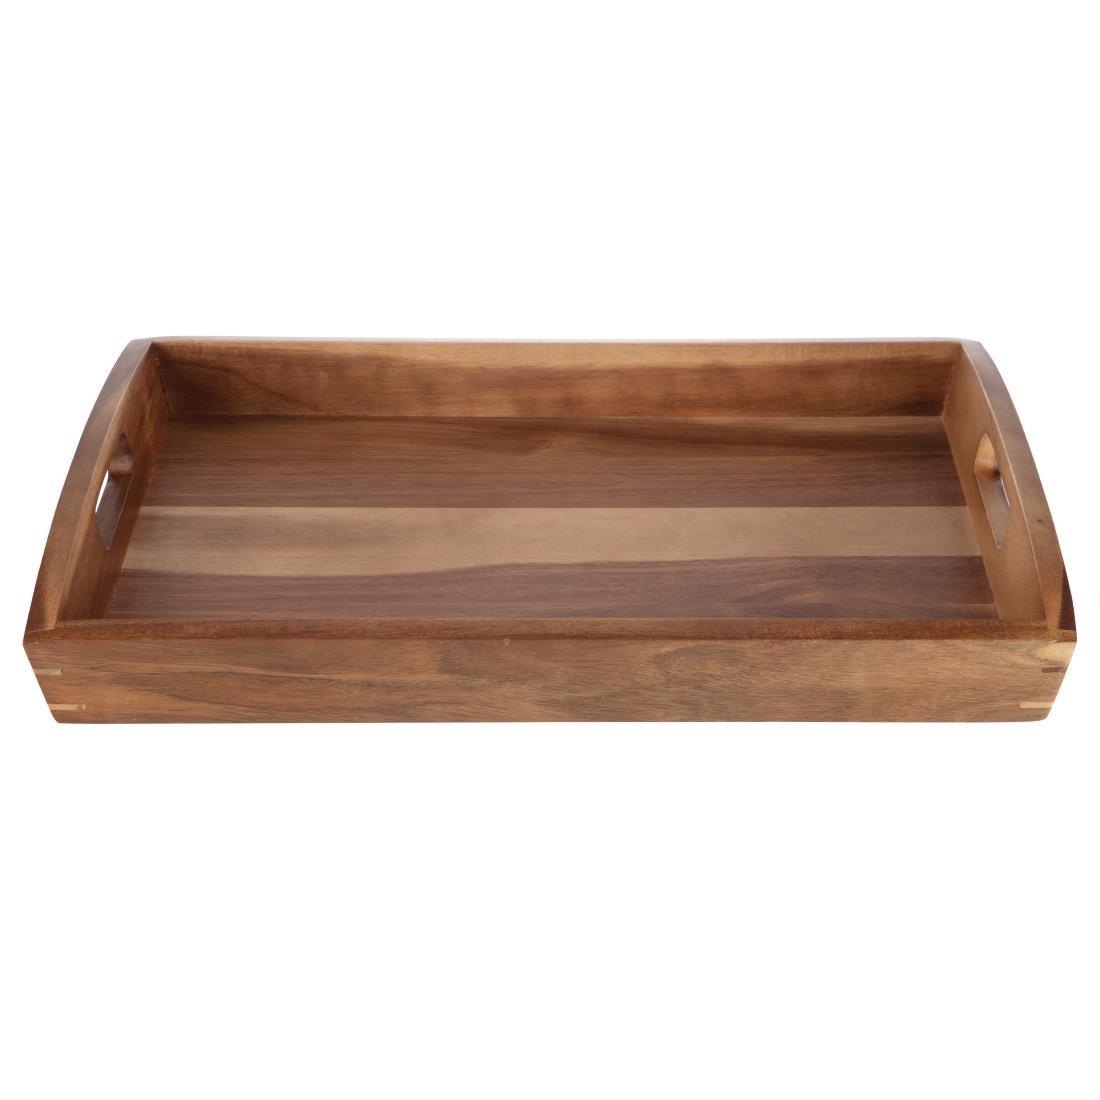 Olympia Large Acacia Wood Butler Tray 510mm - GM266  - 3